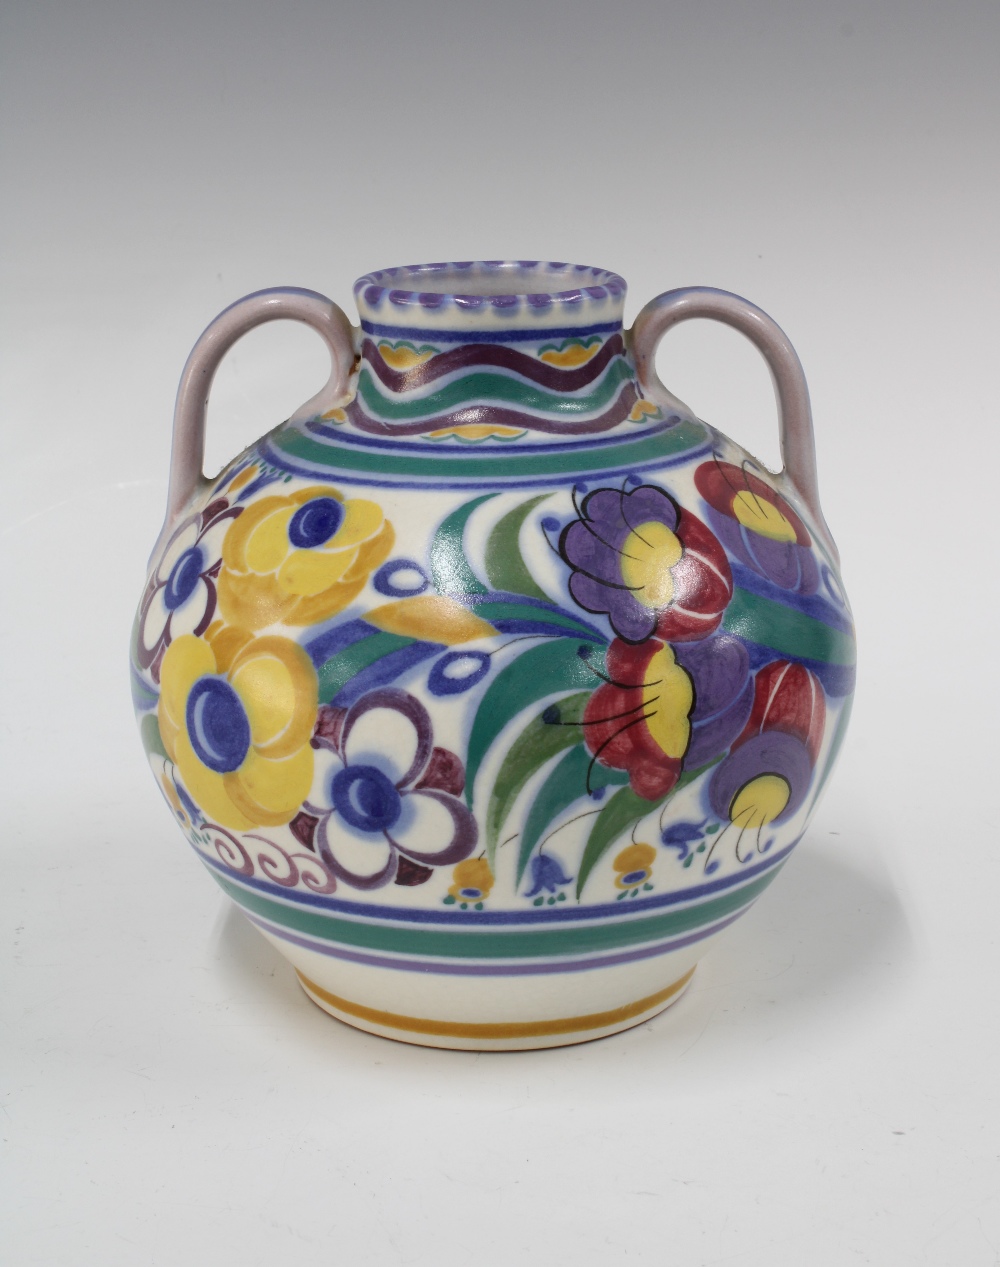 Poole Pottery 1930s fuschia pattern vase with loop handles, impressed factory marks and pattern mark - Image 2 of 3